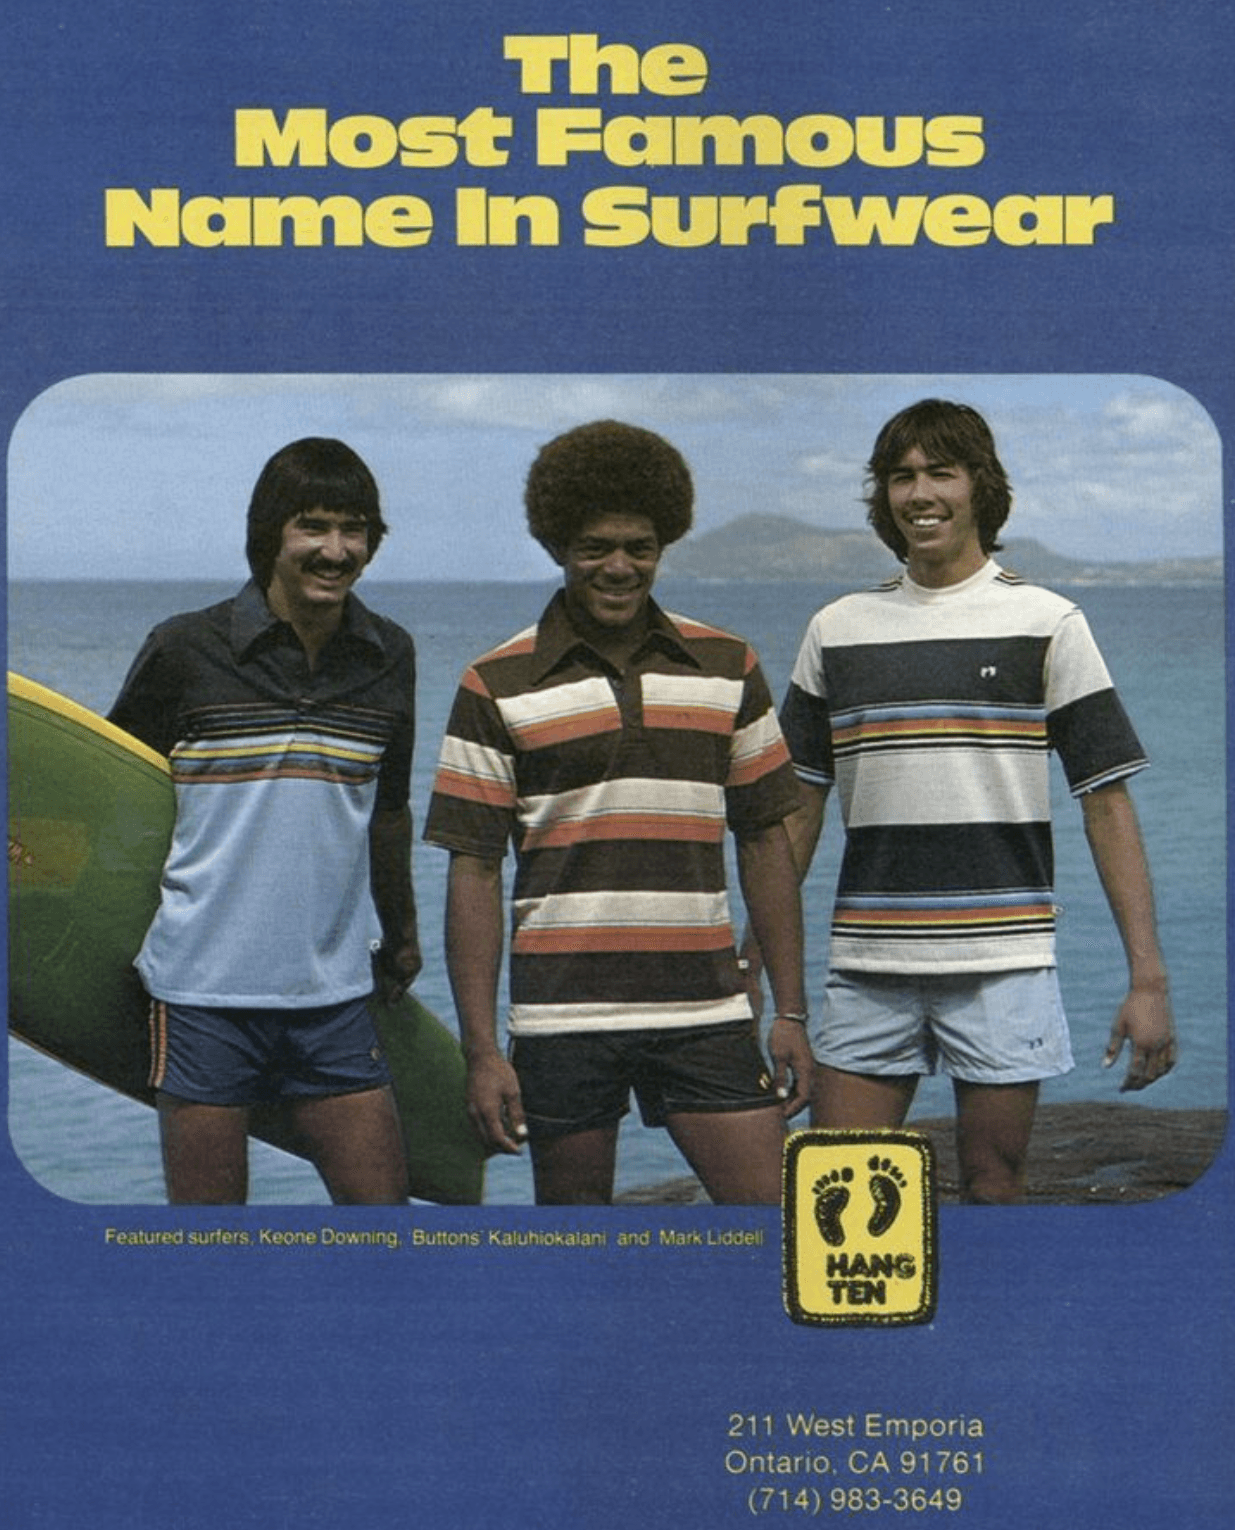 vintage ad depicting three surfer men wearing shorts at the beach